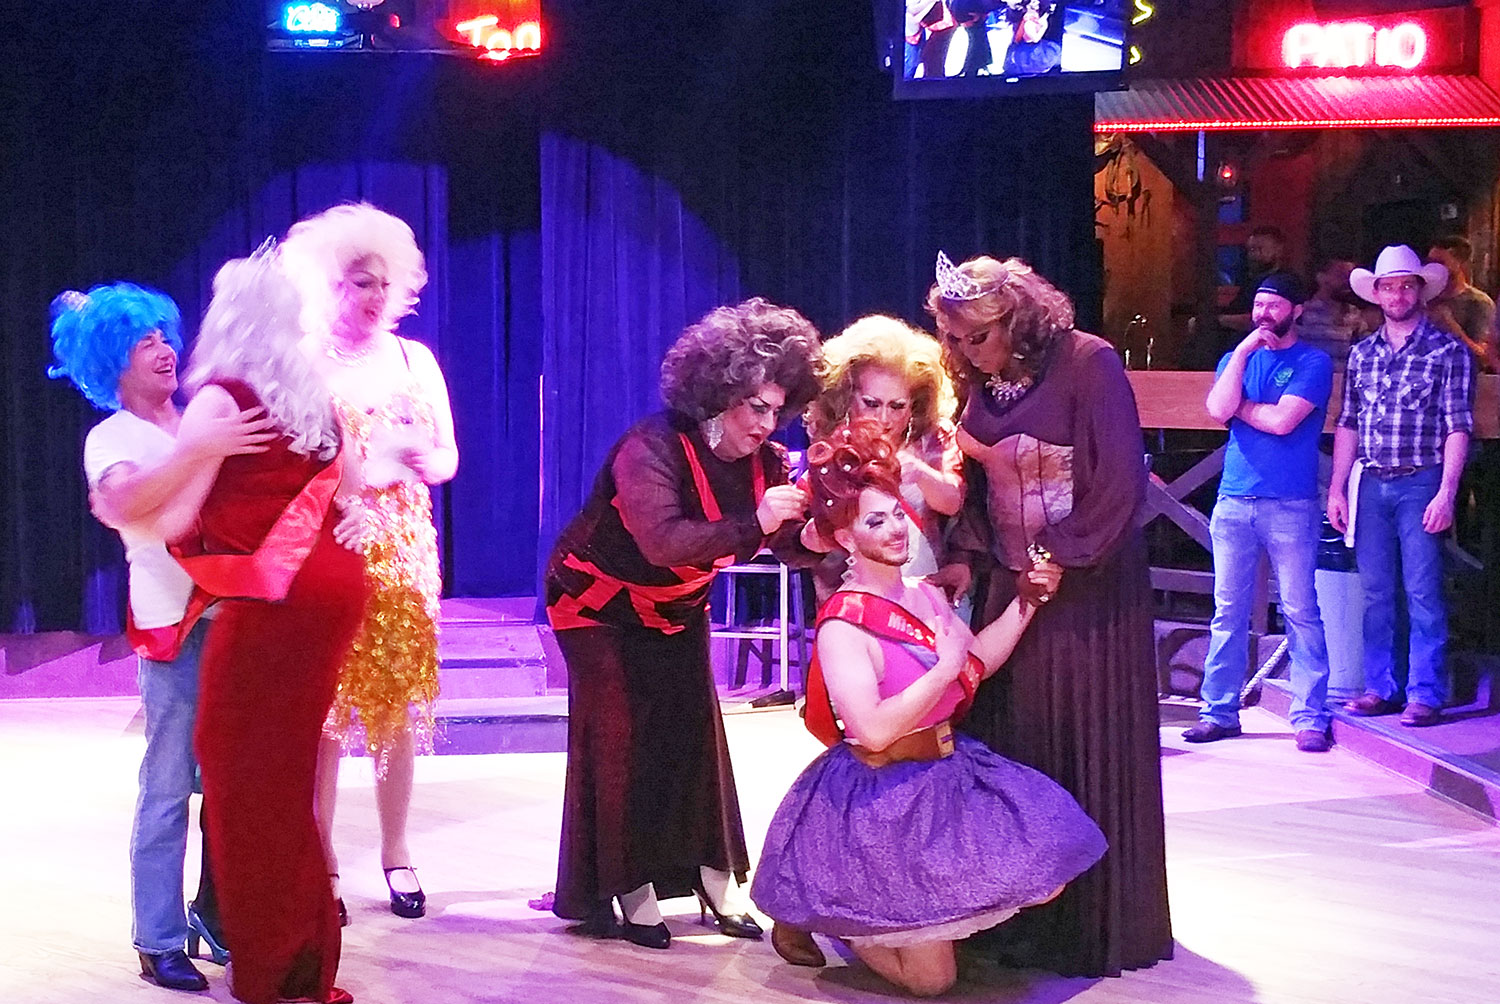 Round-up Saloon Drag Pageant